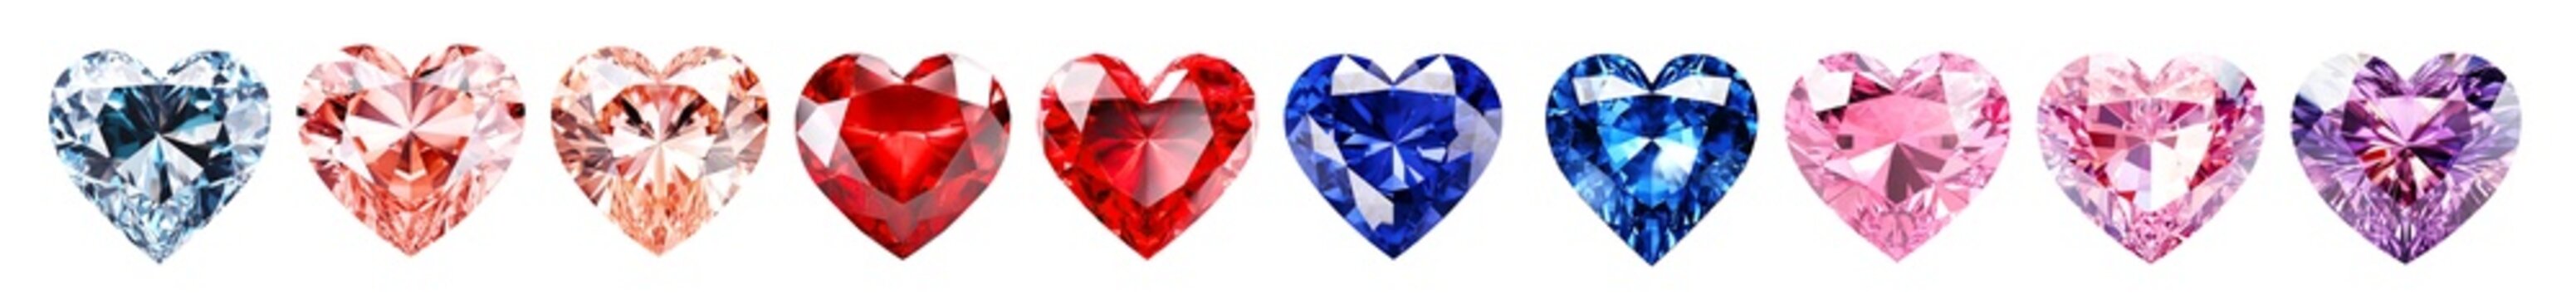 Set of colorful shiny gemstones, diamonds, crystal, sapphires, rubies in heart shape isolated cutout on transparent background.